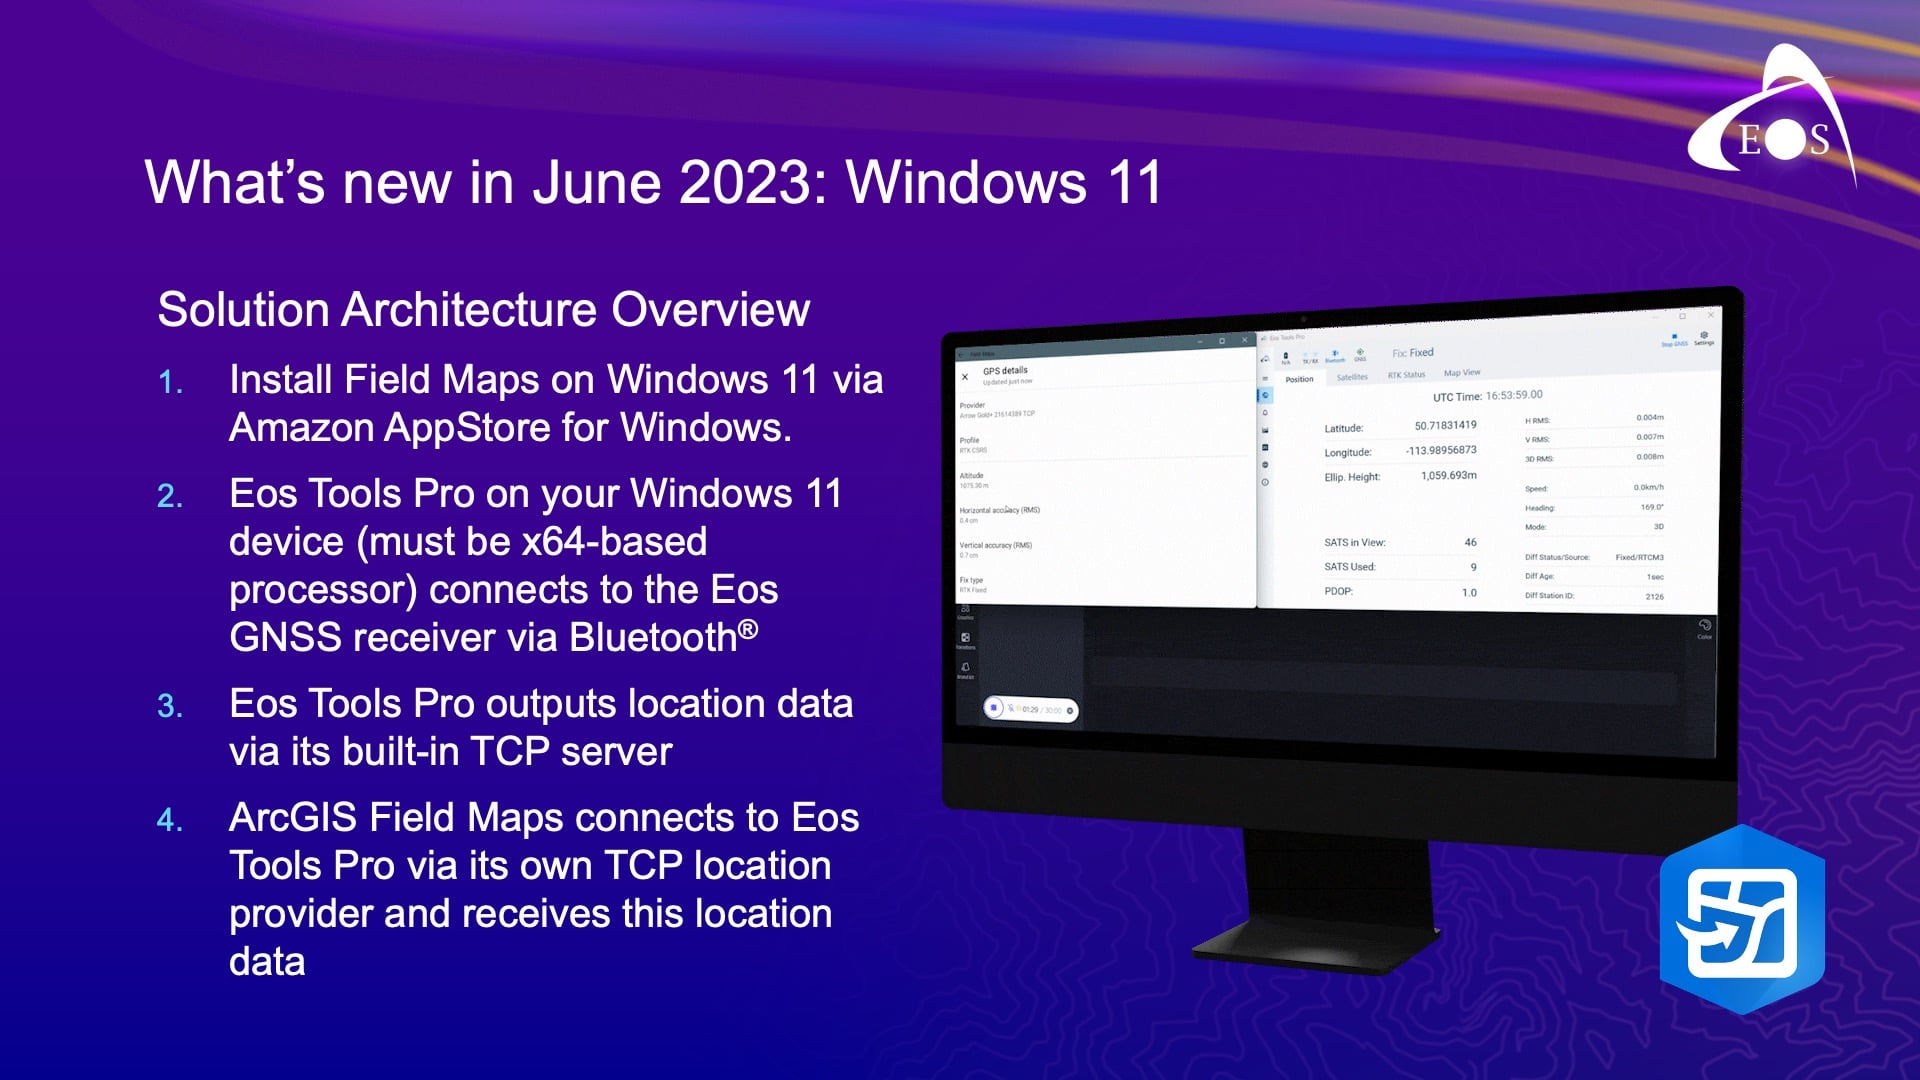 What's new in ArcGIS Field Maps June 2023: Windows 11